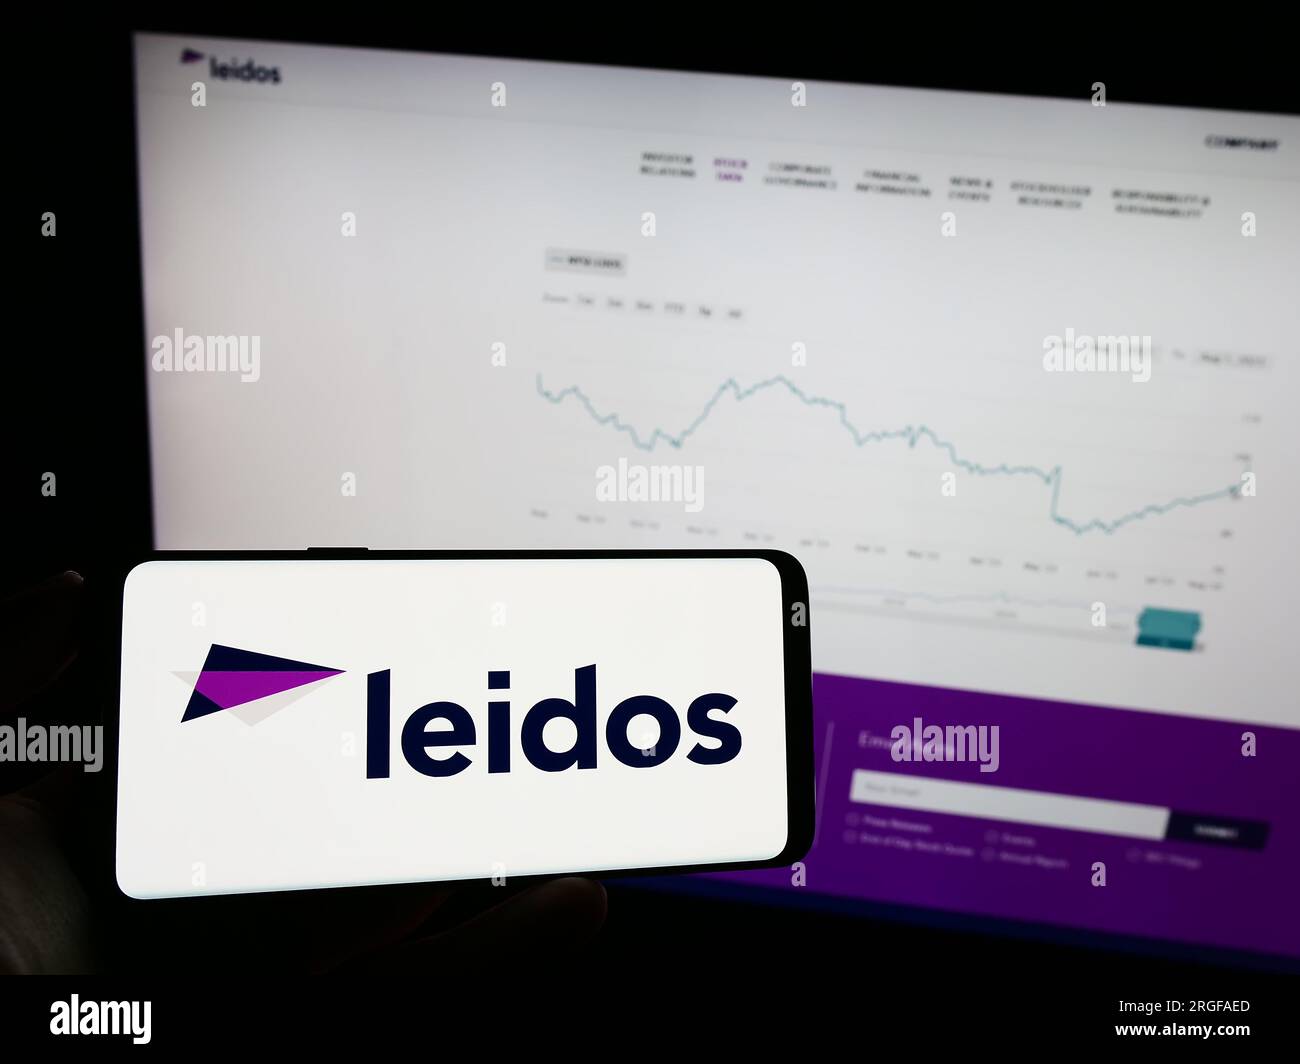 Person holding mobile phone with logo of American defense company Leidos Inc. on screen in front of business web page. Focus on phone display. Stock Photo